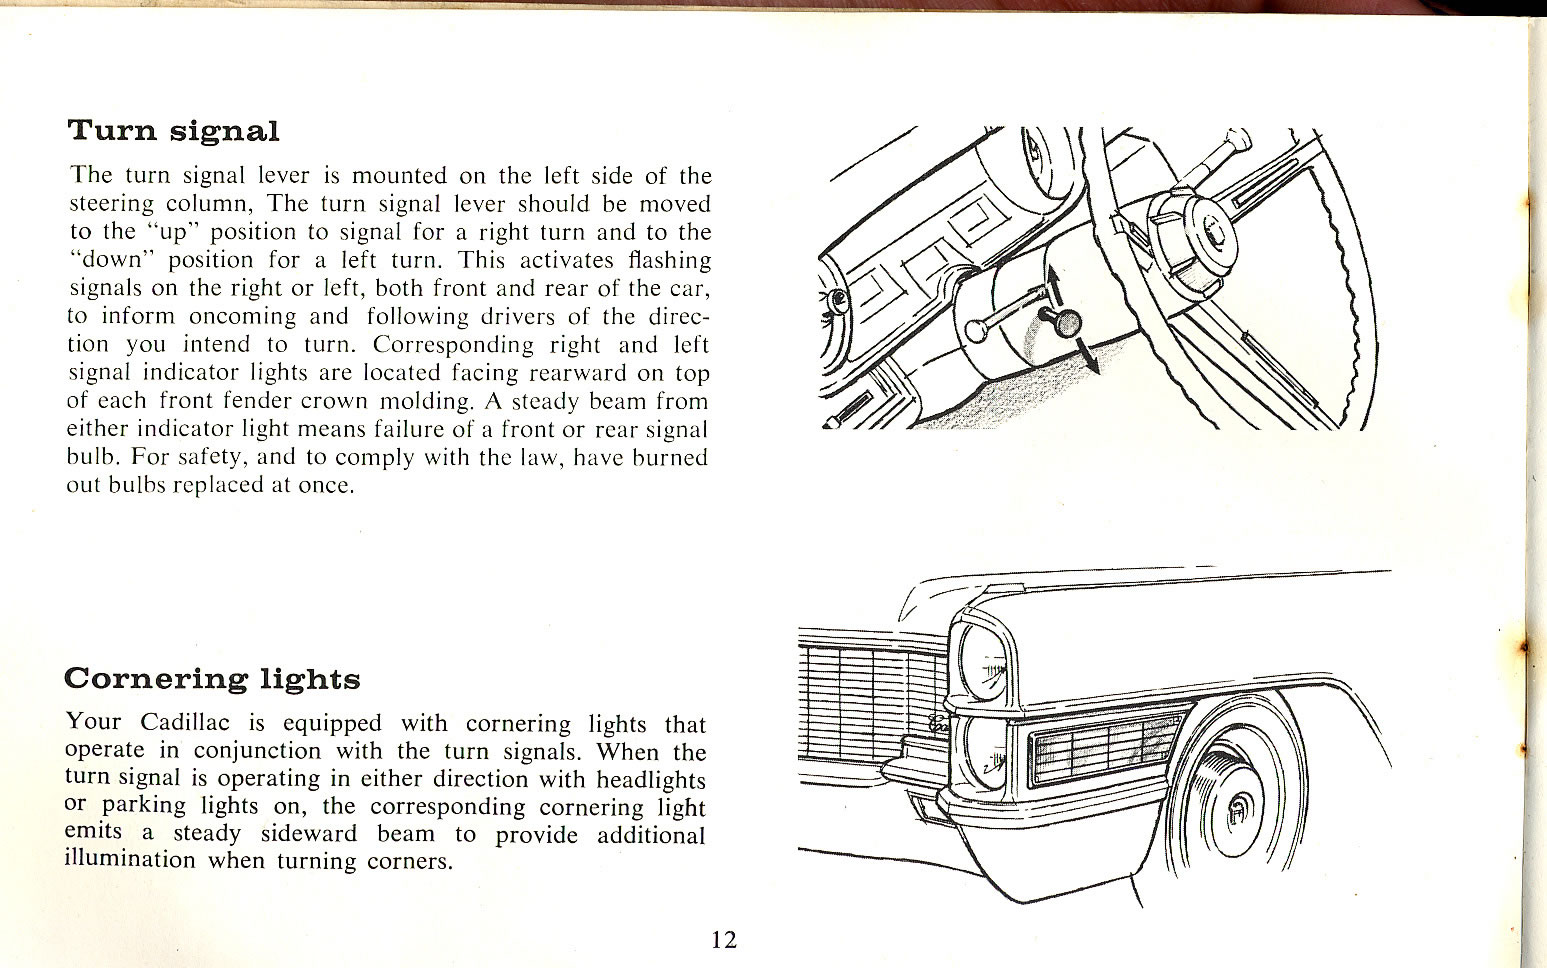 1965 Cadillac Owners Manual Page 4